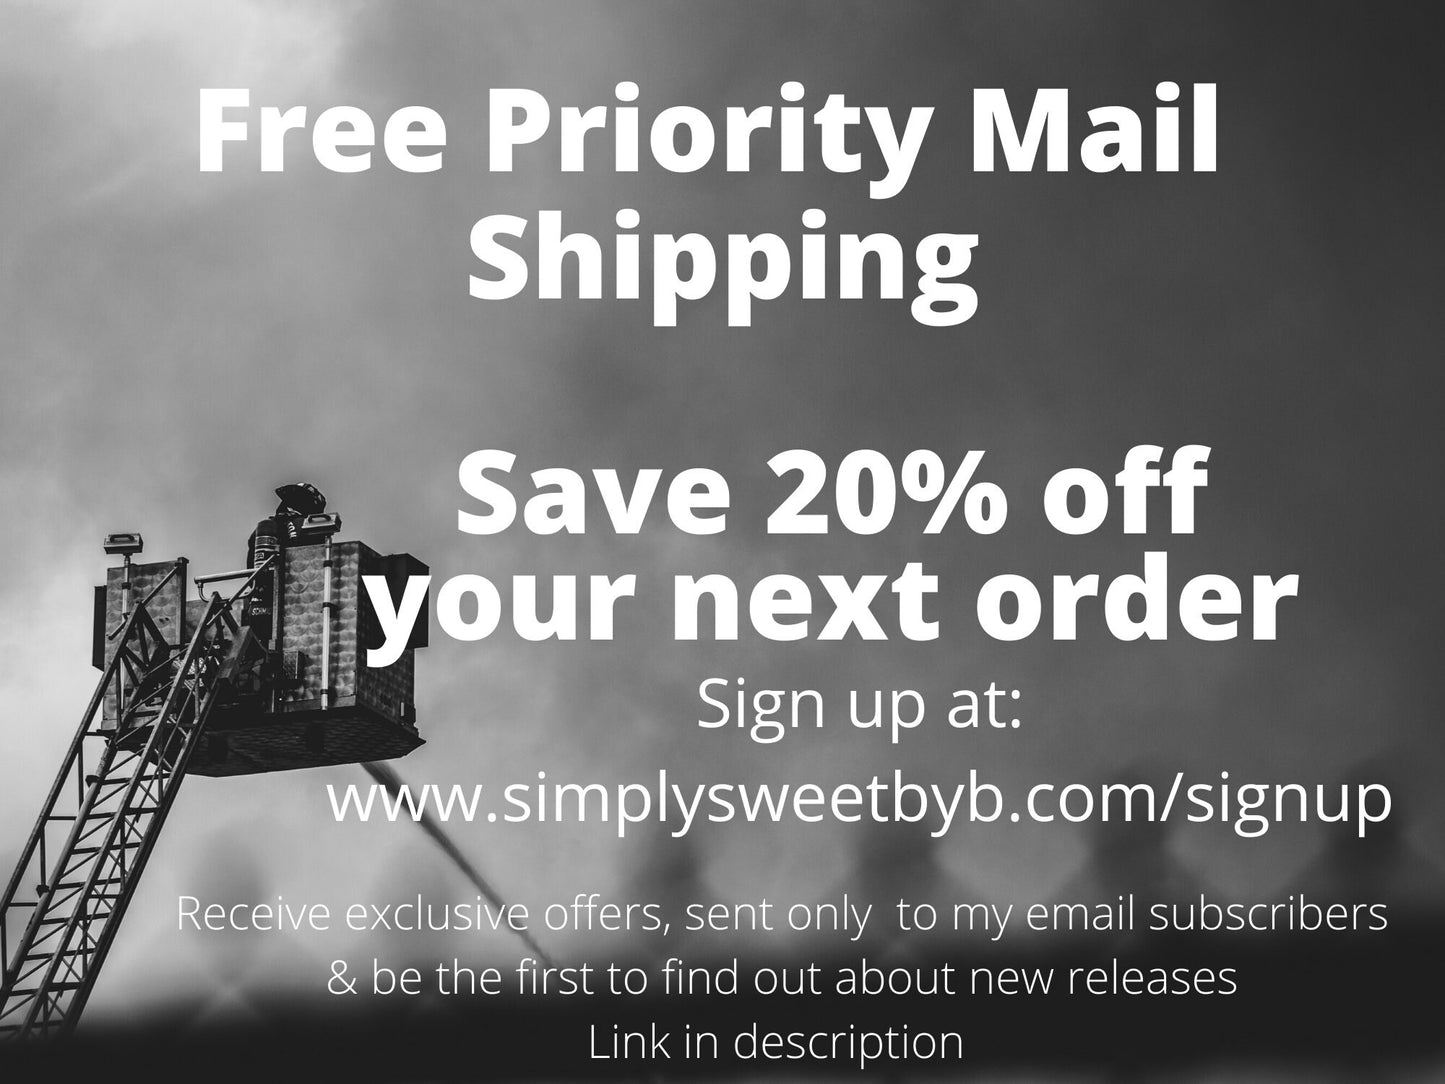 sign up for email to receive 20% off now at www.simplysweetbyb.com/signup